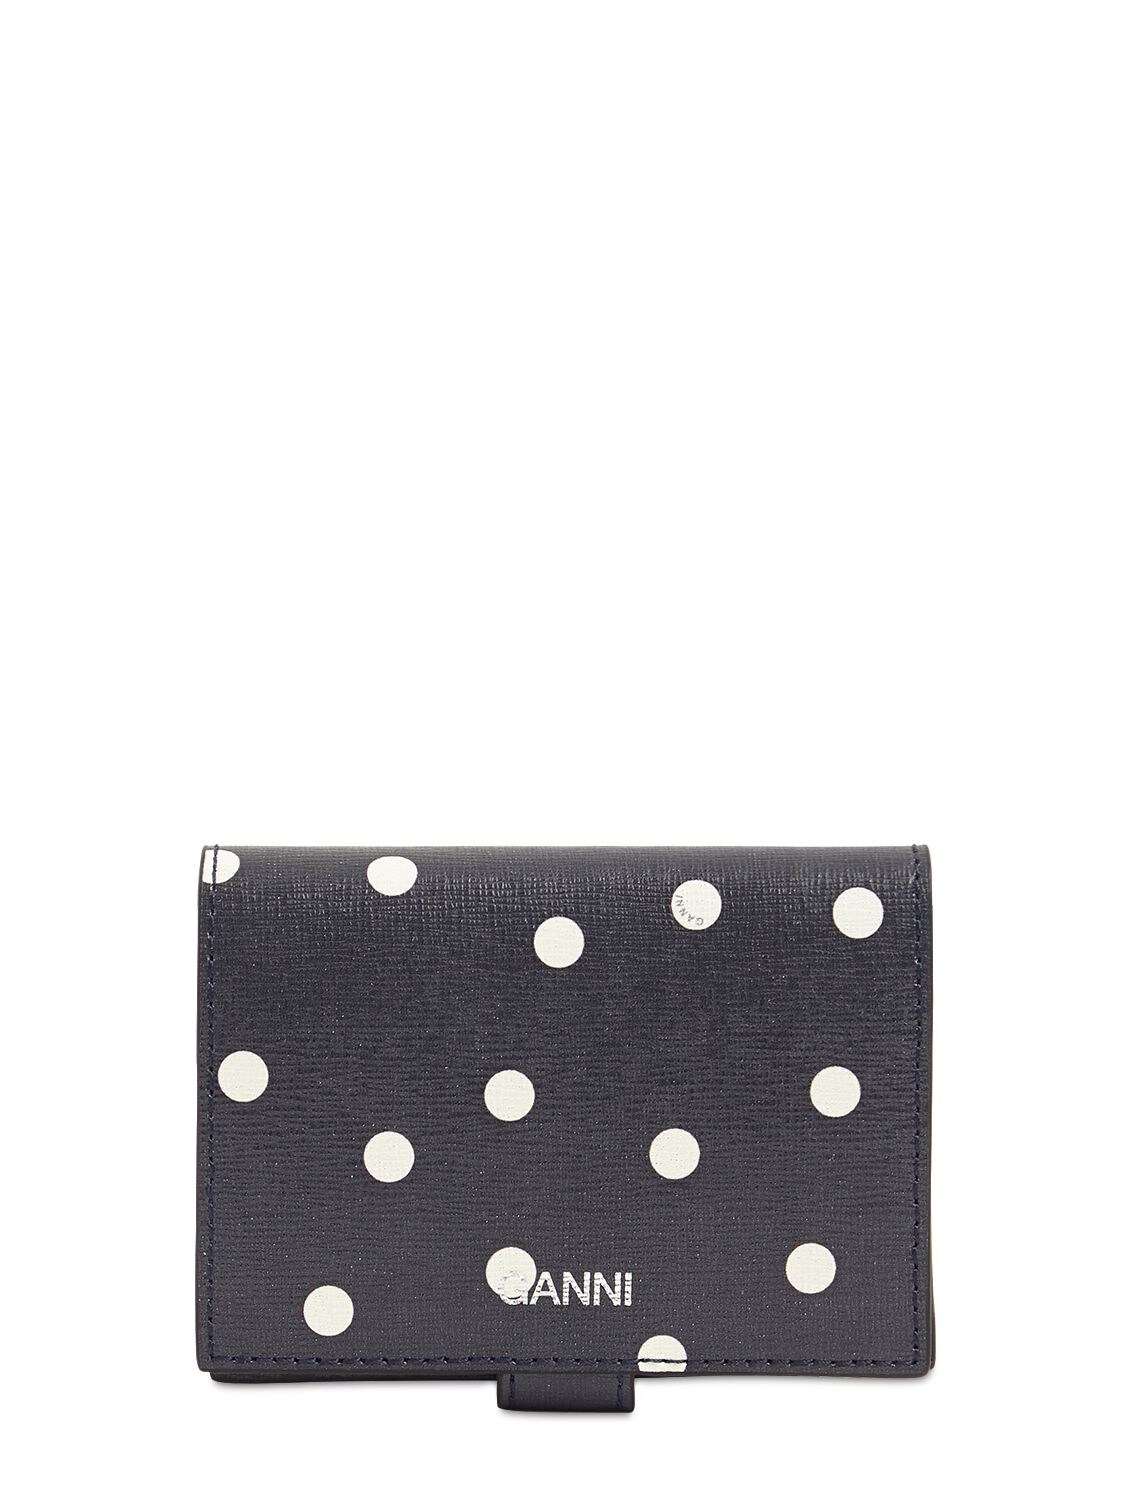 Ganni Printed Leather Compact Wallet In Navy